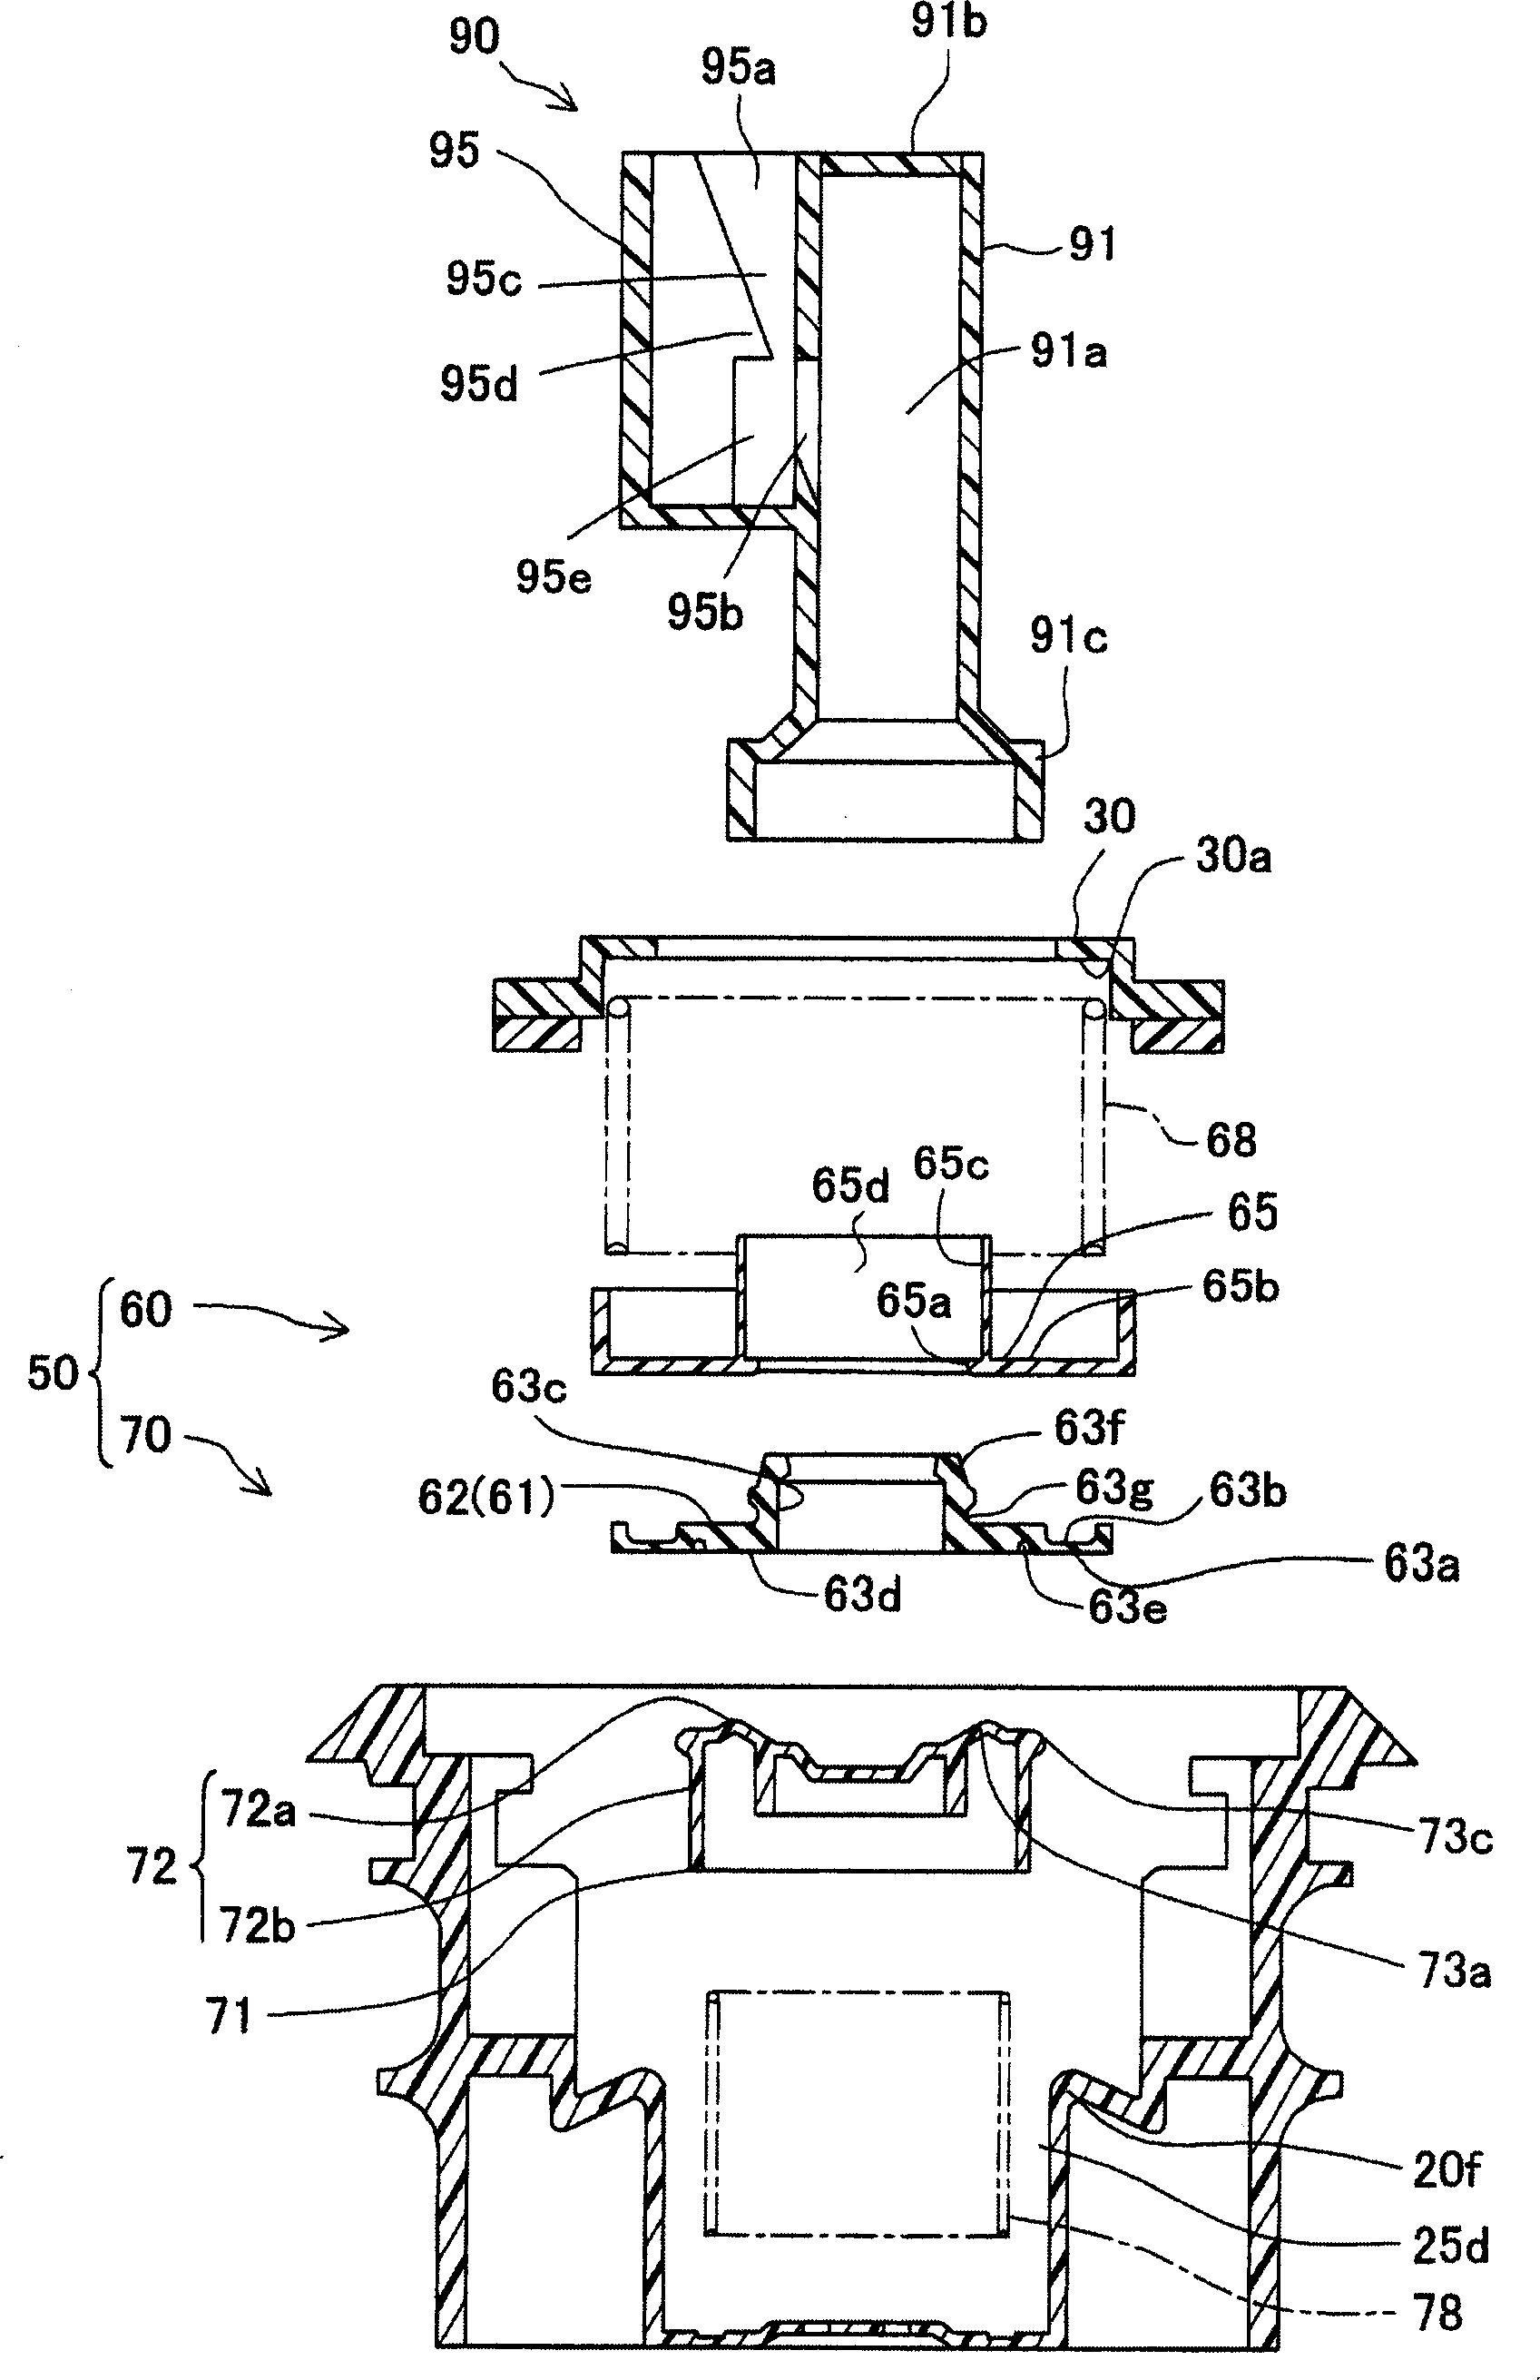 Shut-off device and fueling apparatus for fuel tank